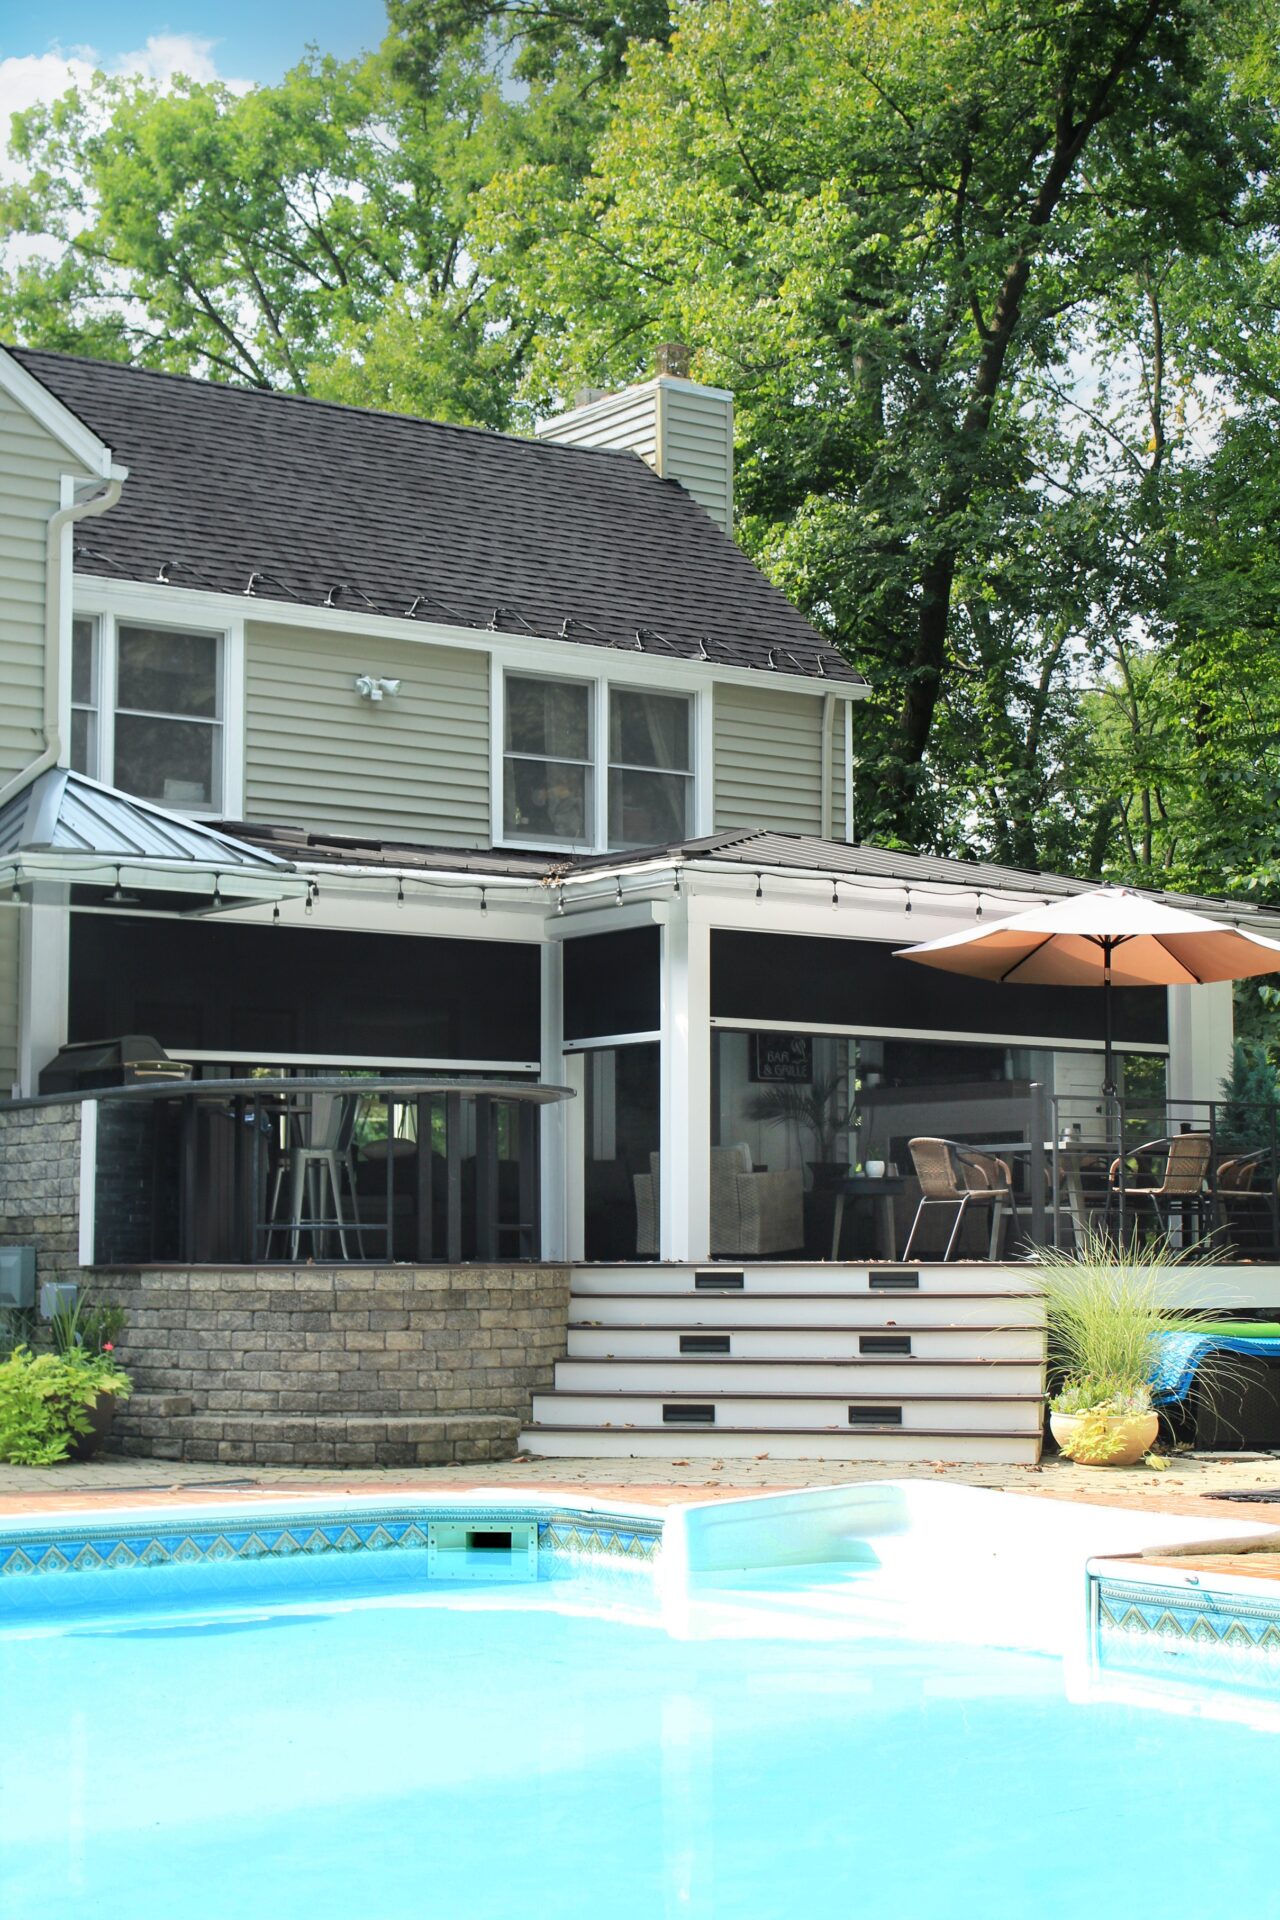 Screening Solutions Ohio transforms this outdoor patio into a screened-in porch in seconds by using Phantom Retractable Screens. These motorized screens appear at the touch of a button and retract out of sight when not in use.